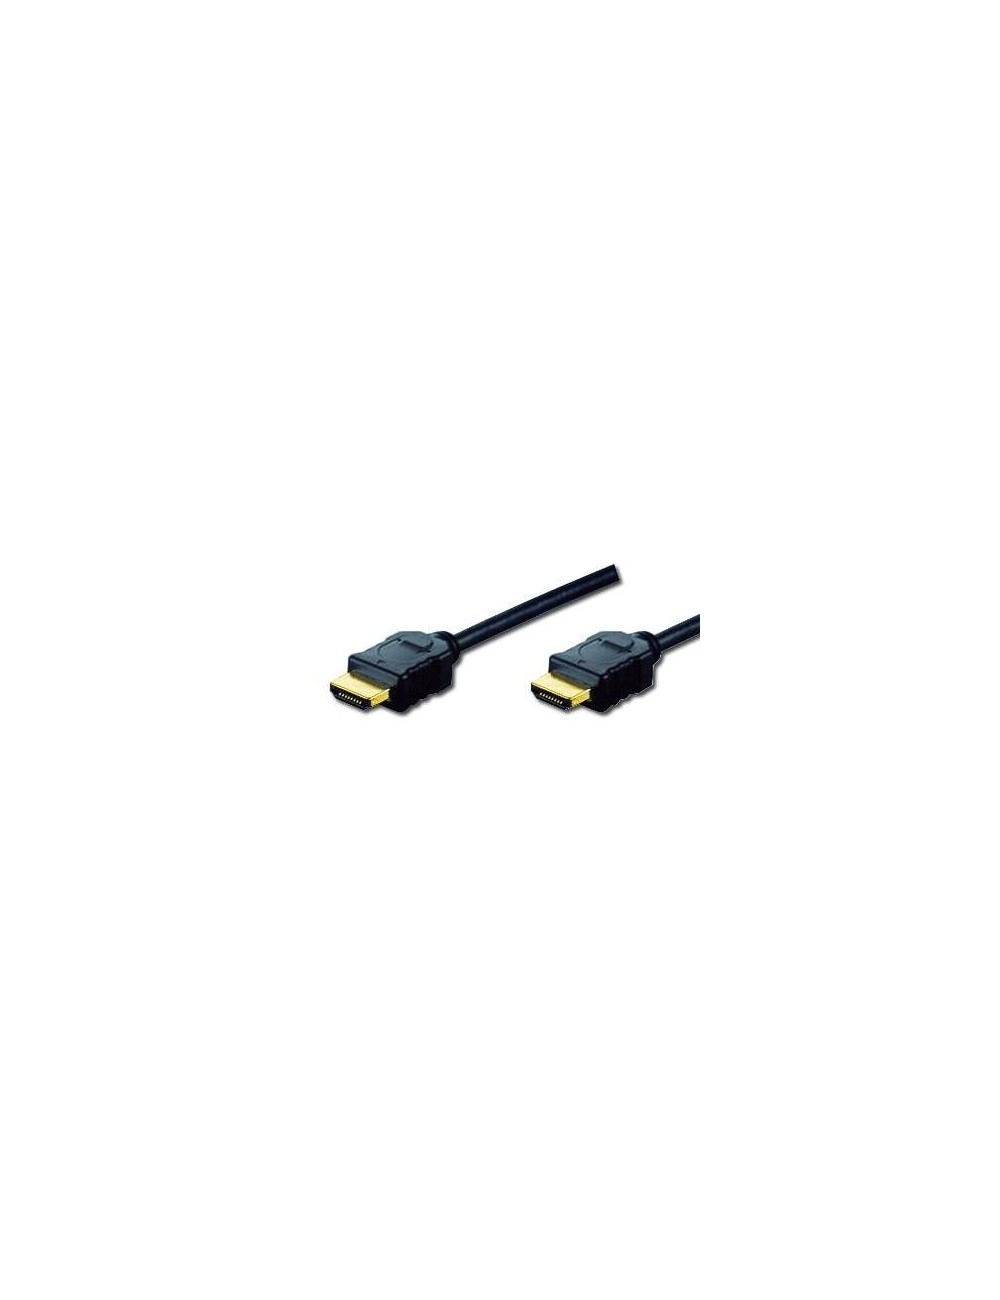 Video cable HDMI 5 meters FULL HD 1080p